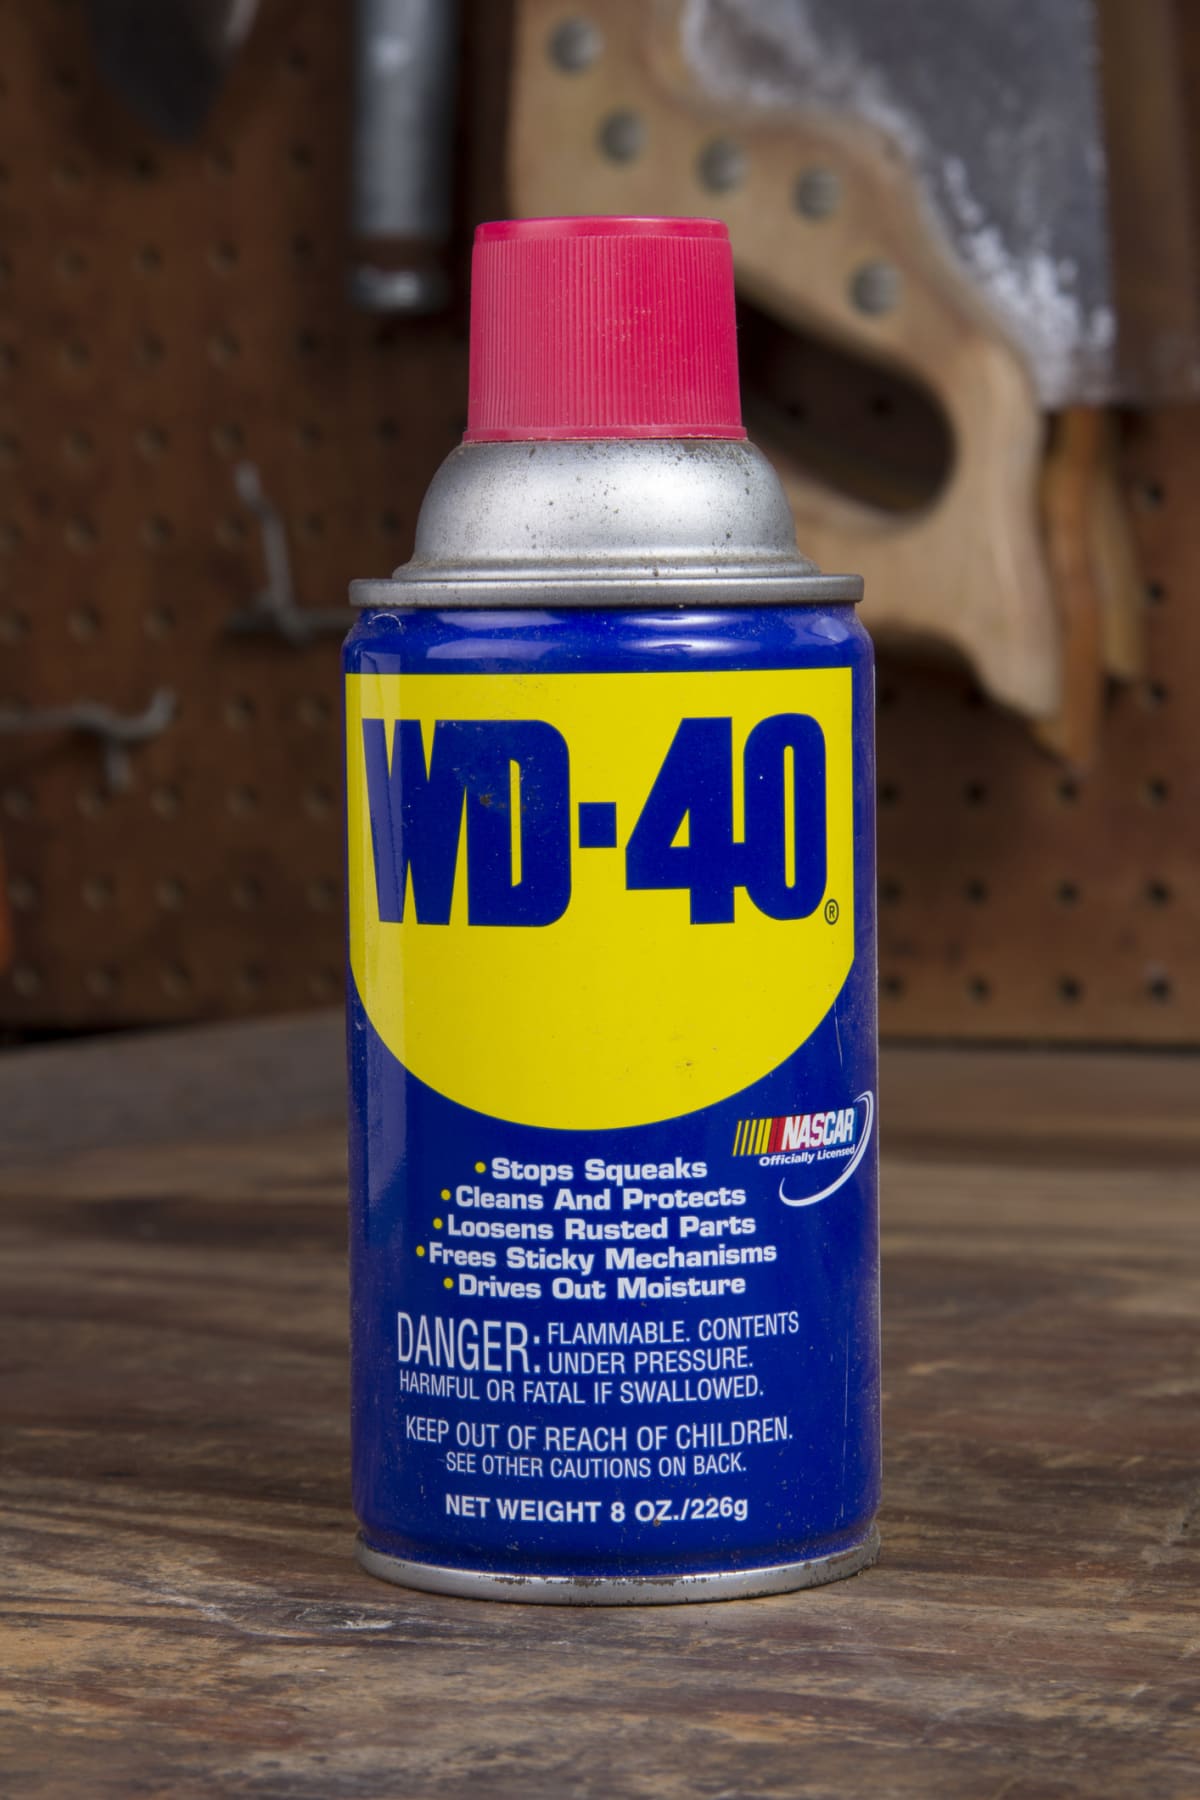 A spray can of WD-40.